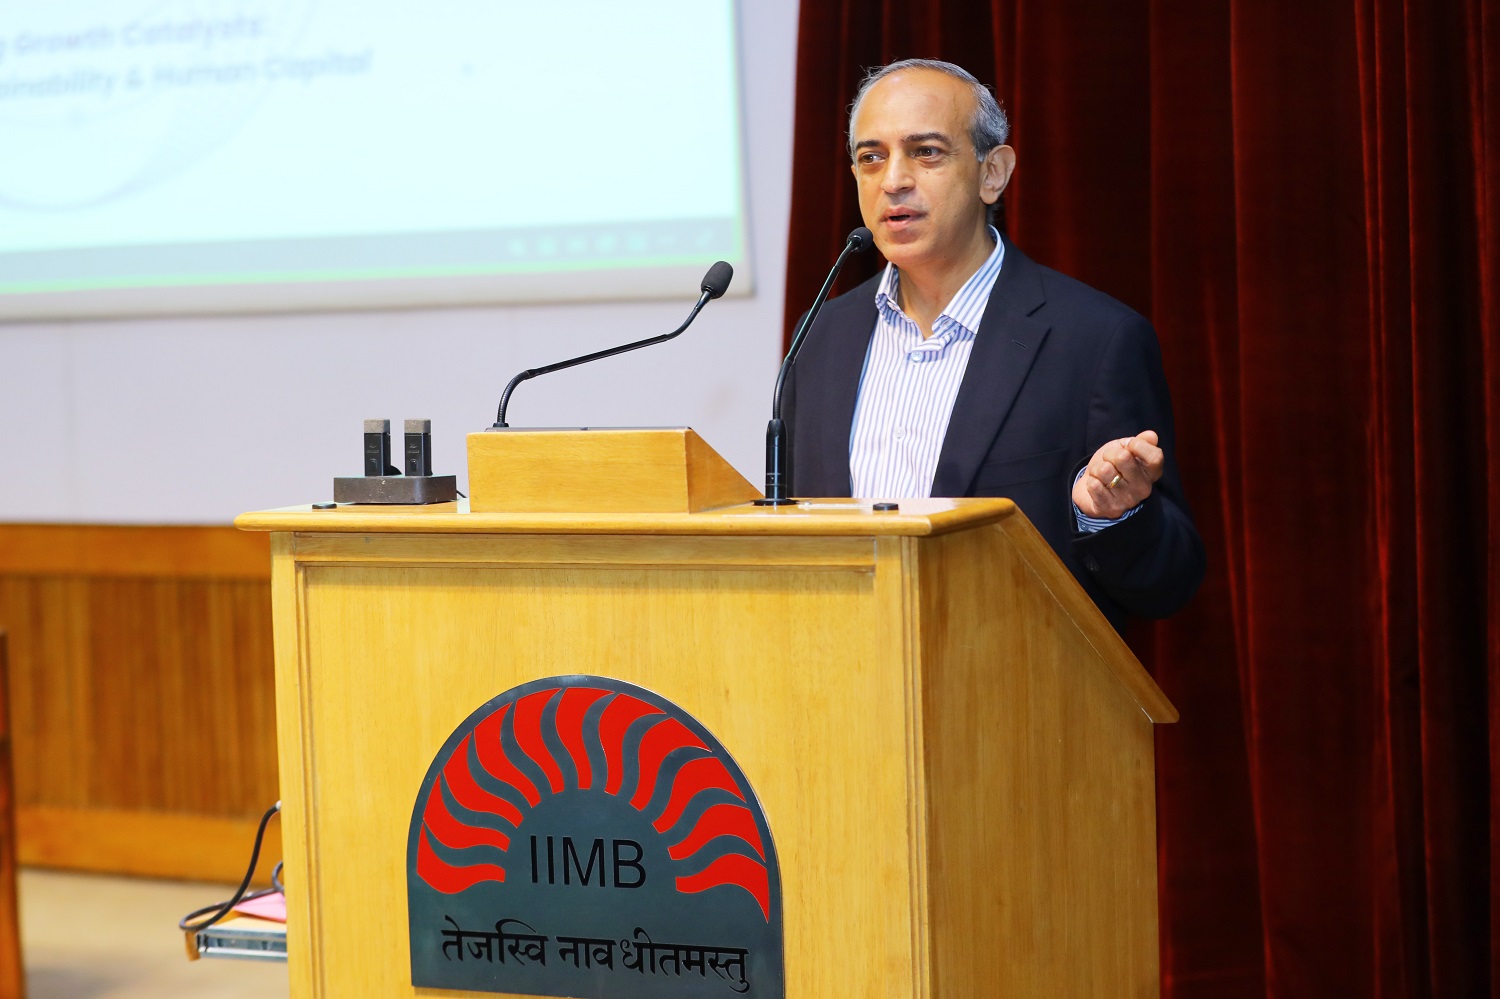 Professor Ashok Thampy, Chairperson, EPGP, provides an overview of the EPGP Programme at IIMB.